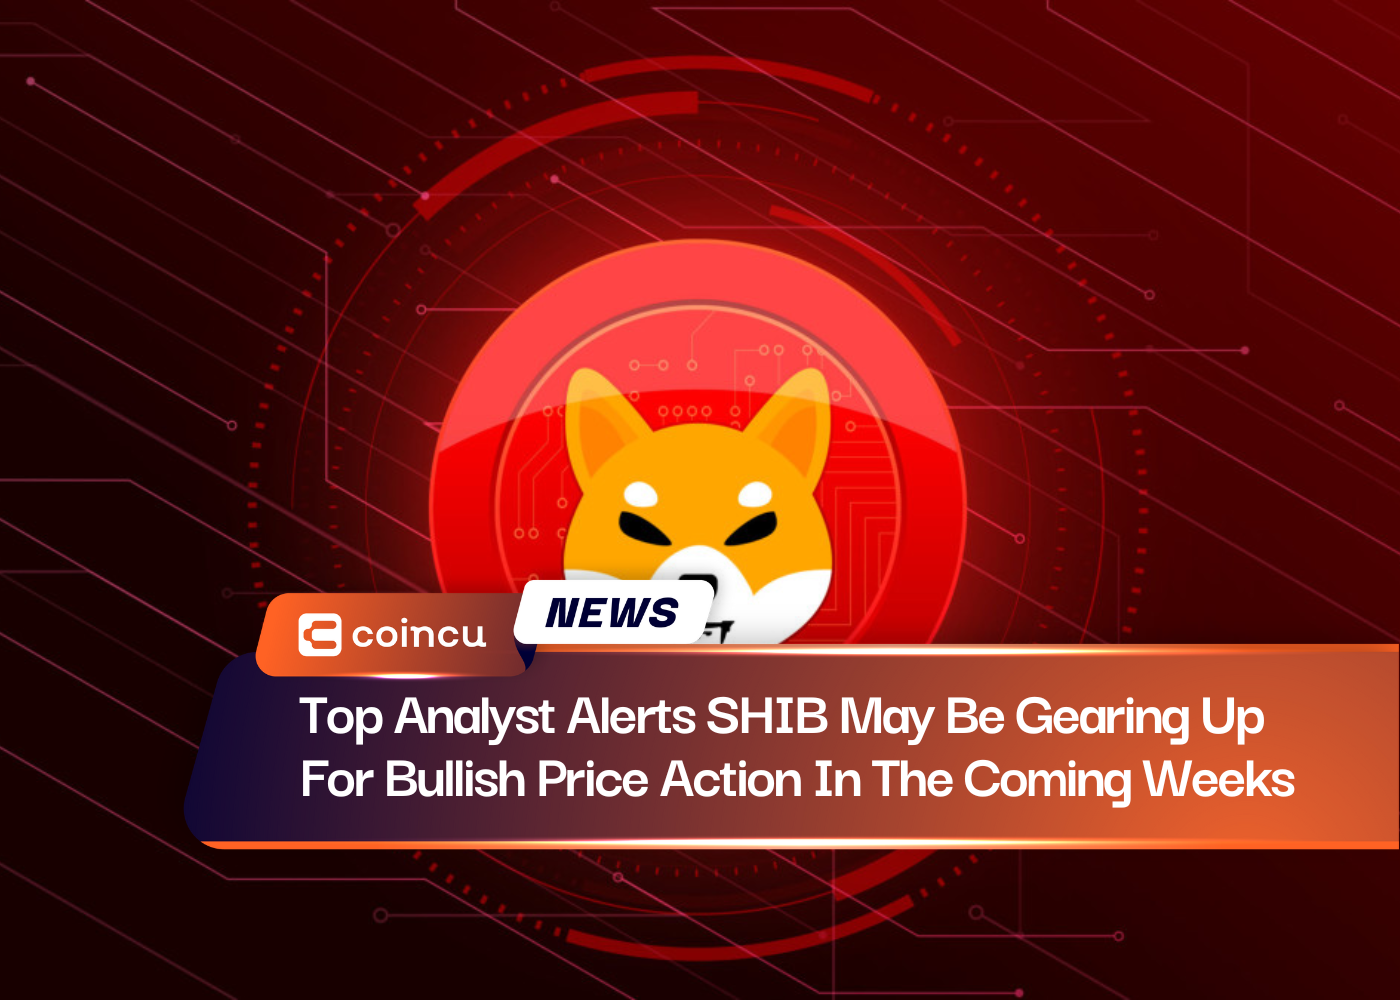 Top Analyst Alerts SHIB May Be Gearing Up For Bullish Price Action In The Coming Weeks